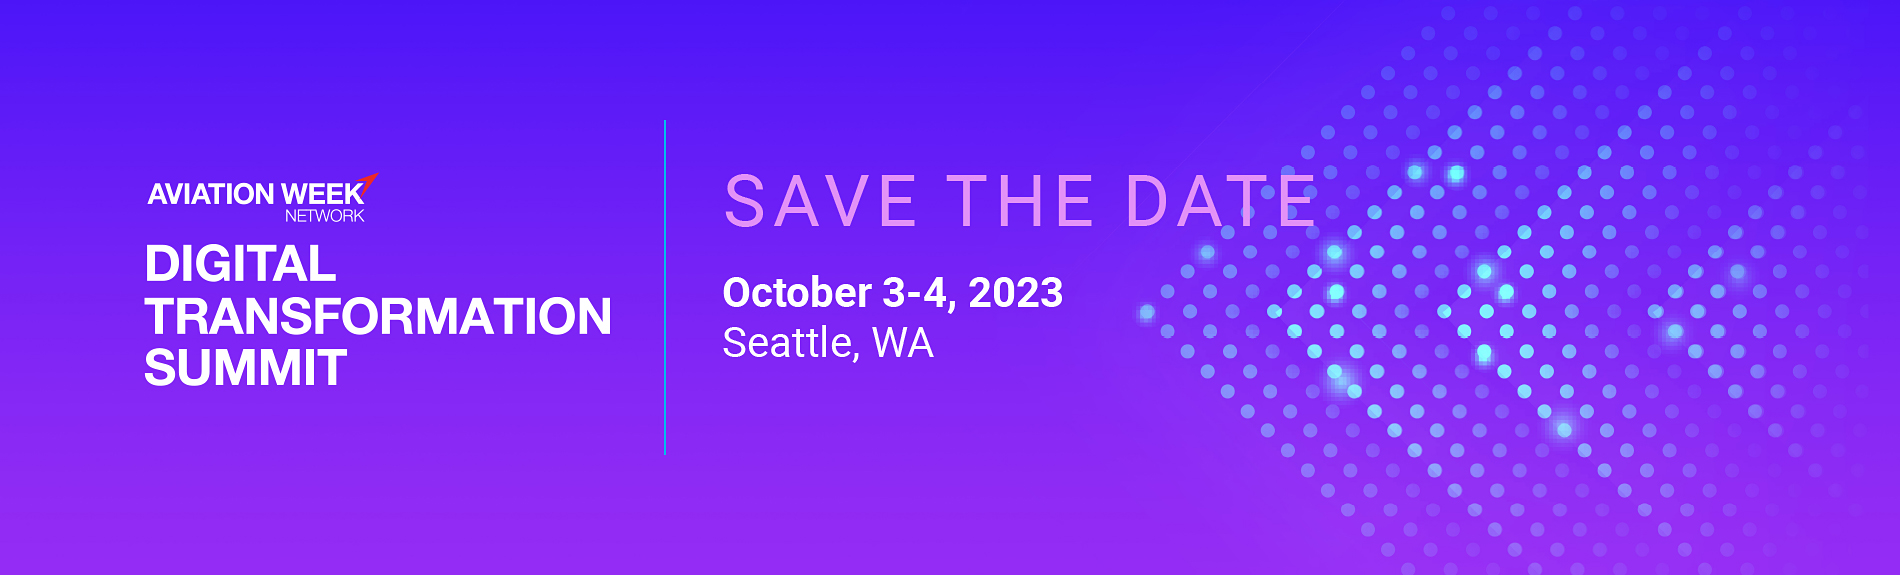 Save the Date - October 3-4, 2023